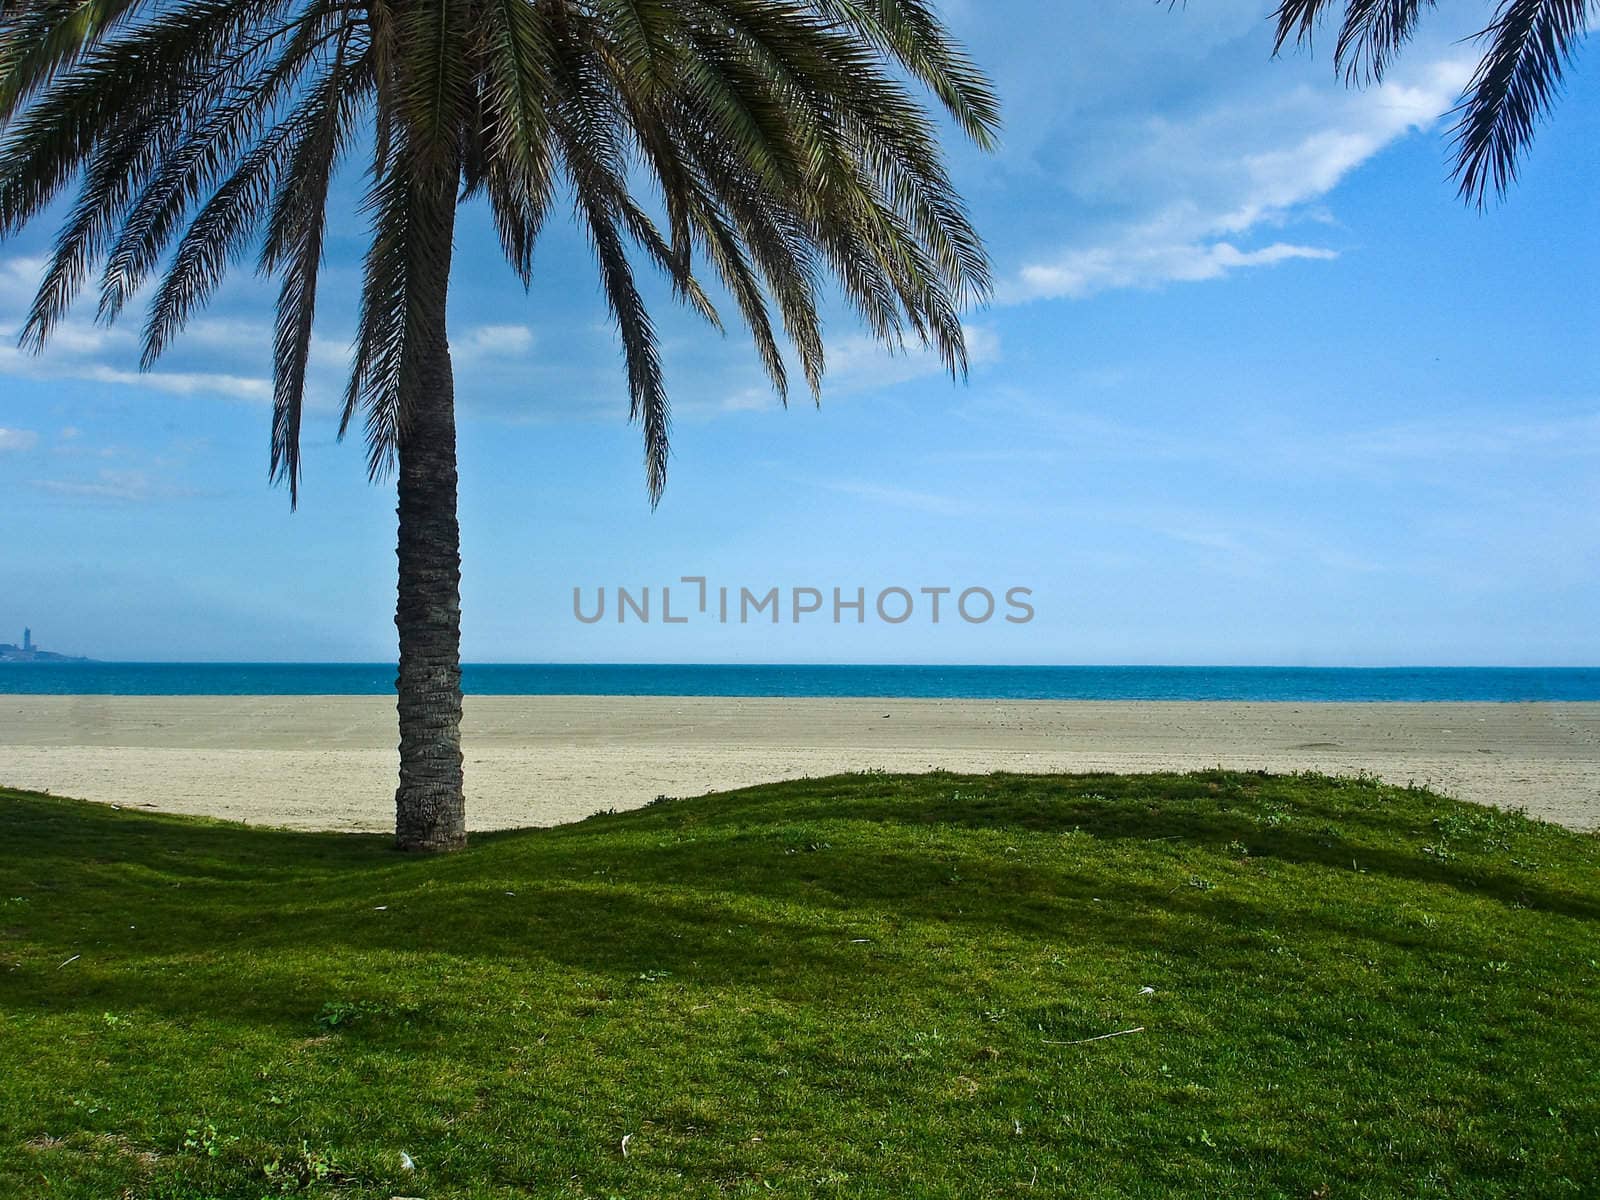  Beach and Sea View From Under a Palm Tree